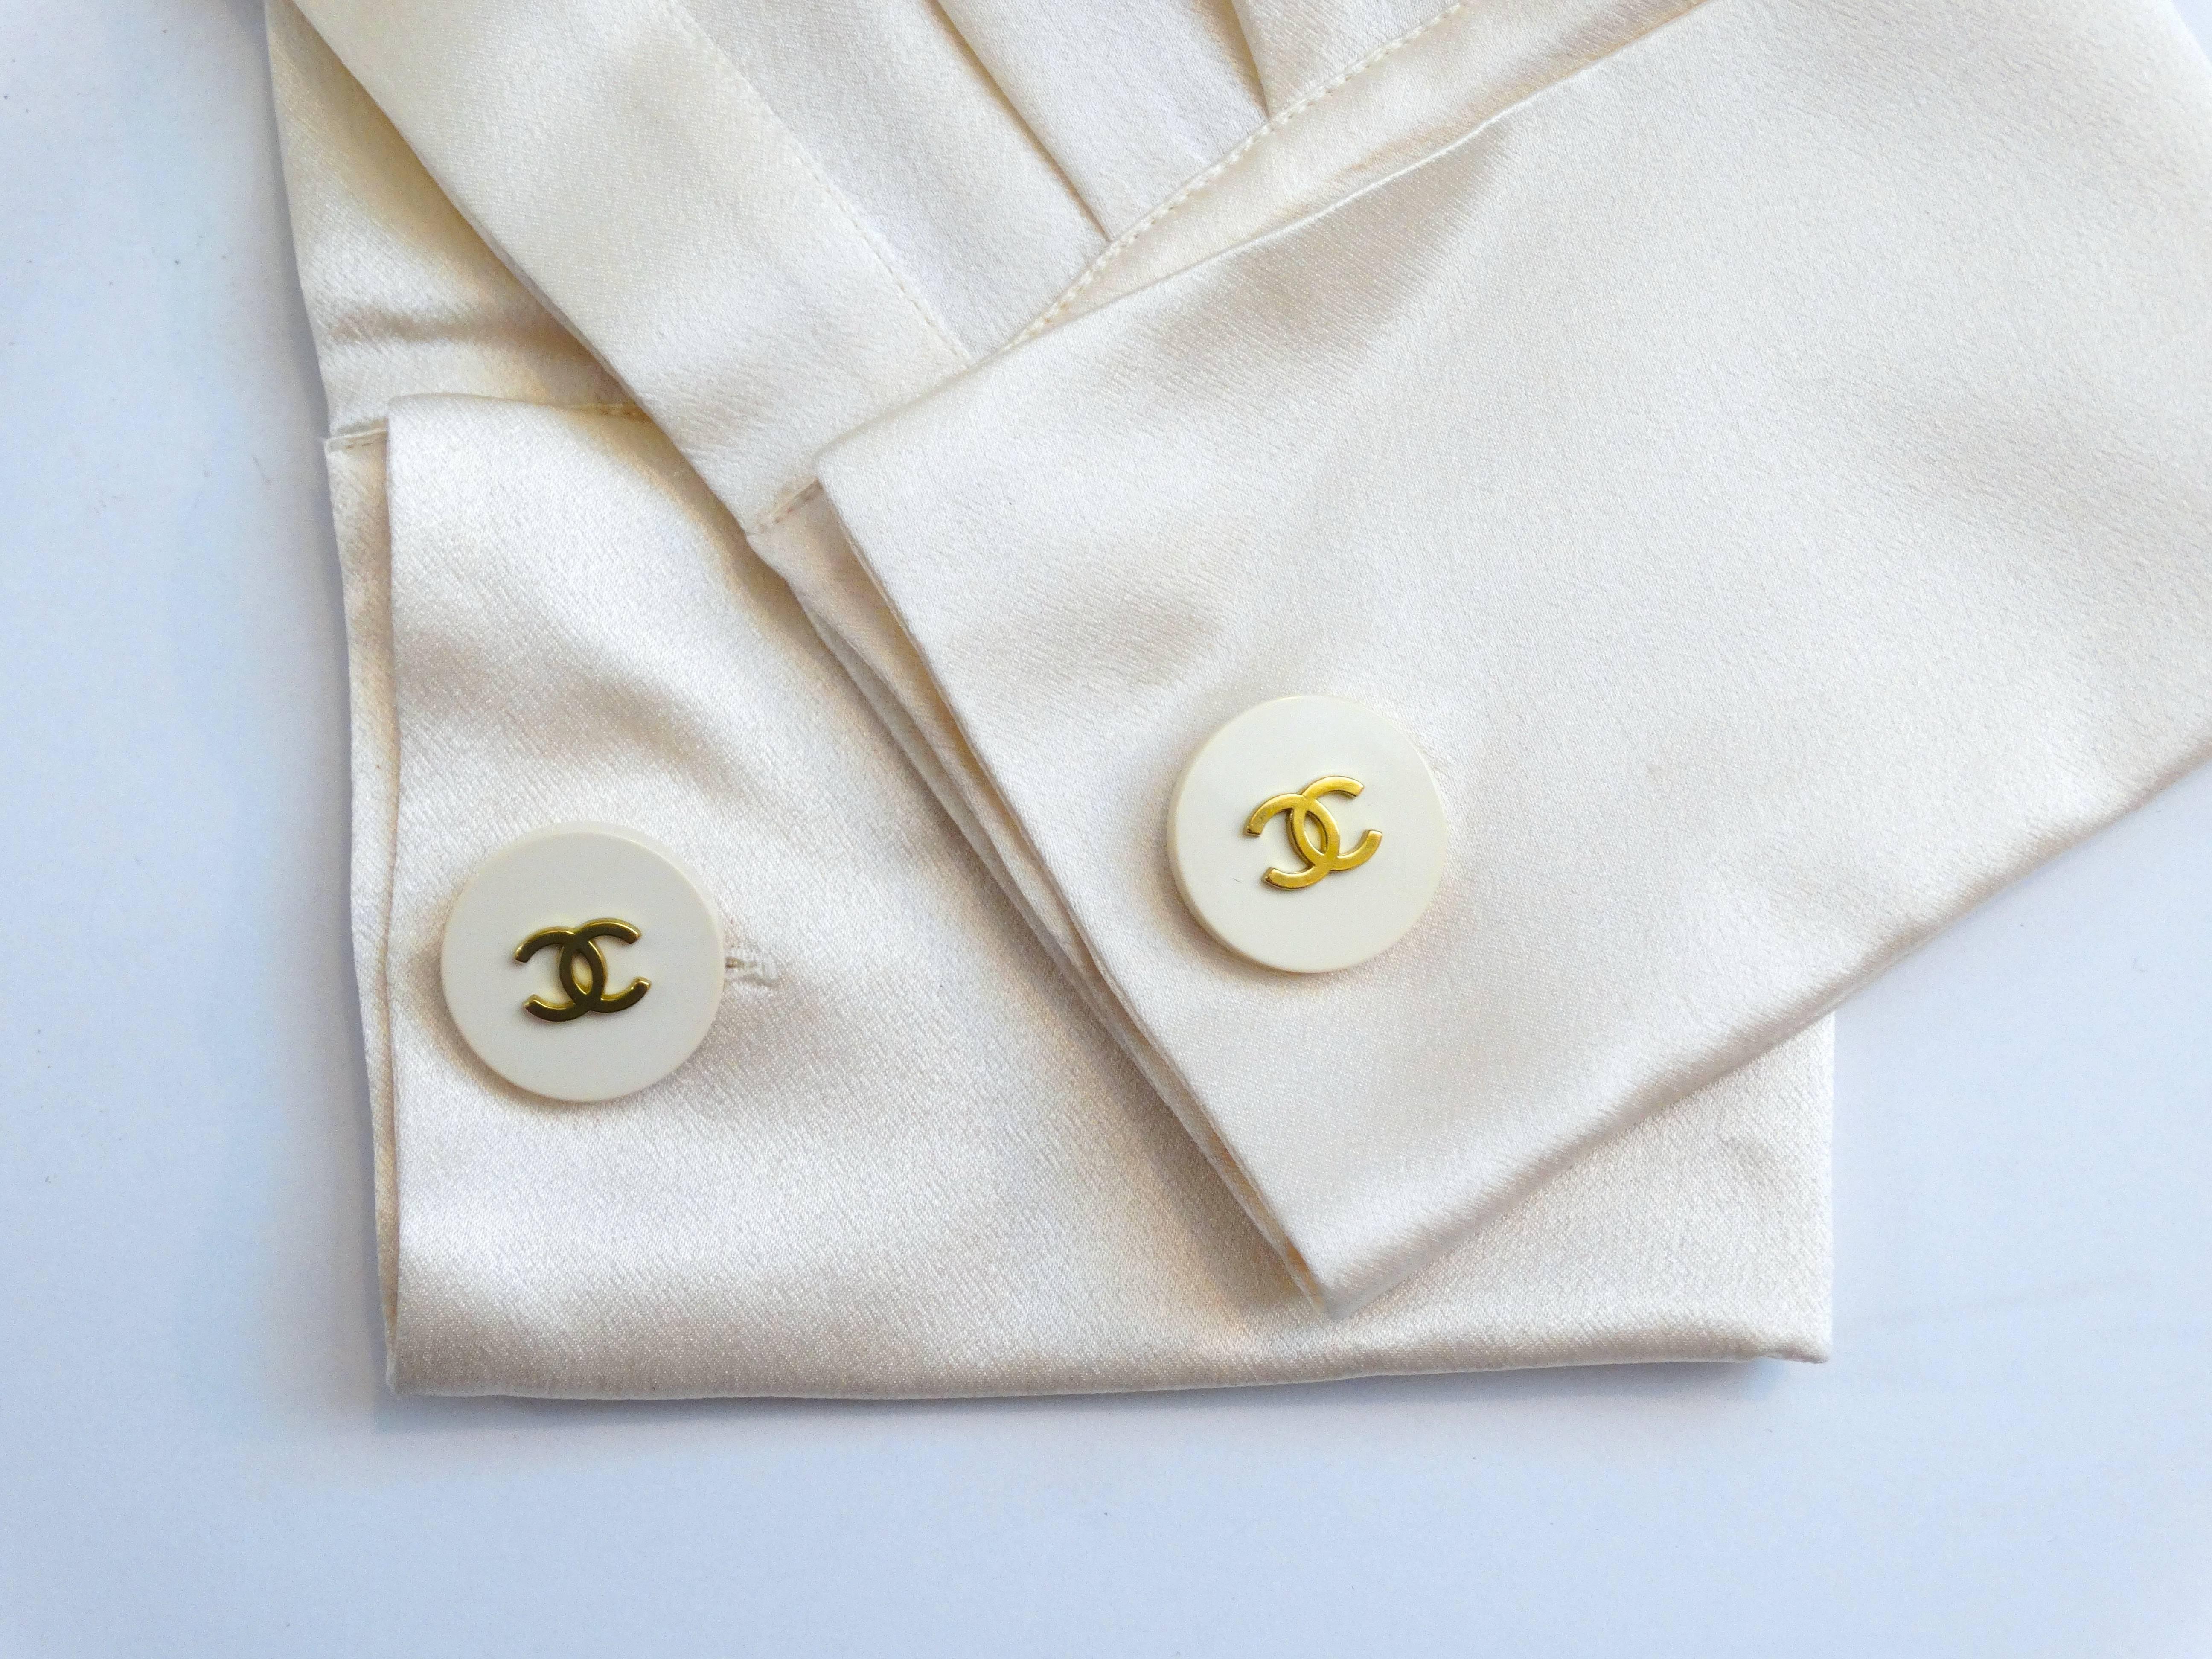 Classic 1990's Chanel Cufflinks -Cream and gold metal cufflinks; double-sided with two round disks of cream resign with the iconic Chanel double 